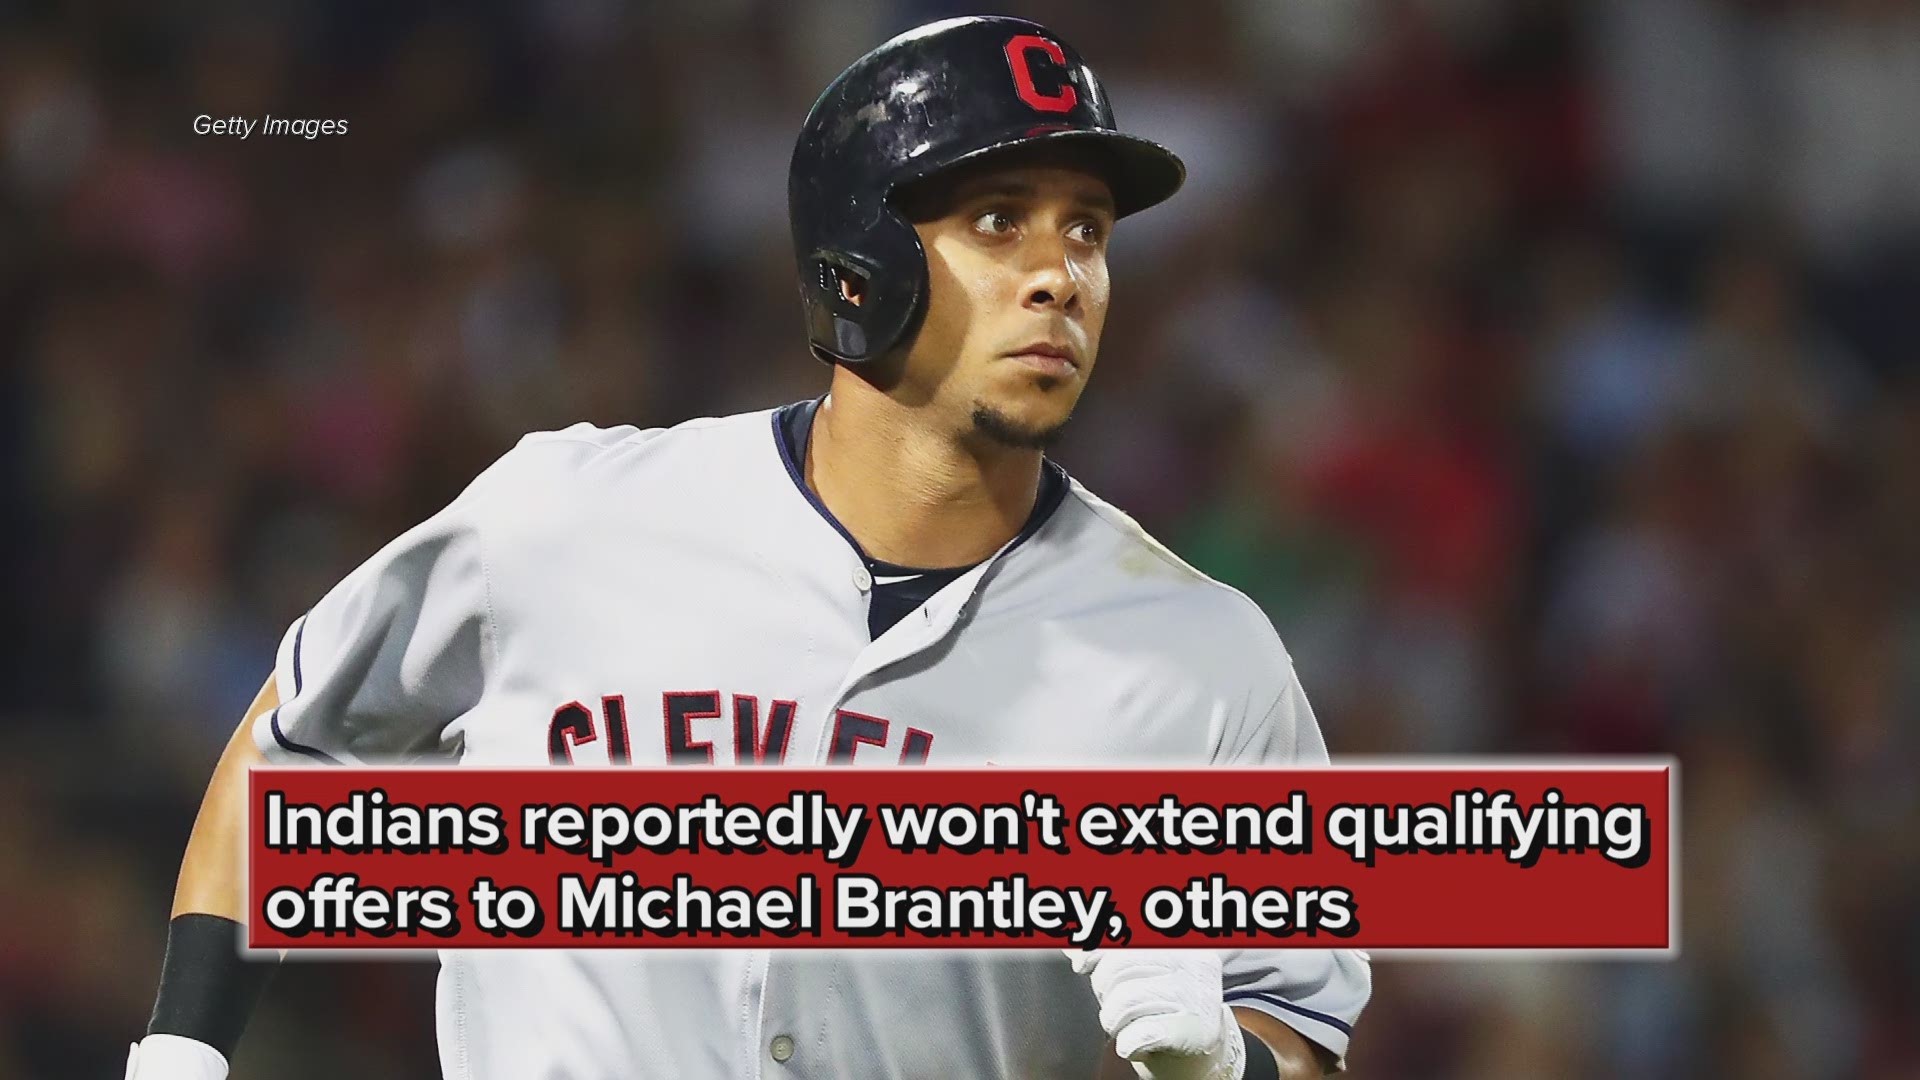 Report: Cleveland Indians won't extend qualifying offers to Michael Brantley,  others